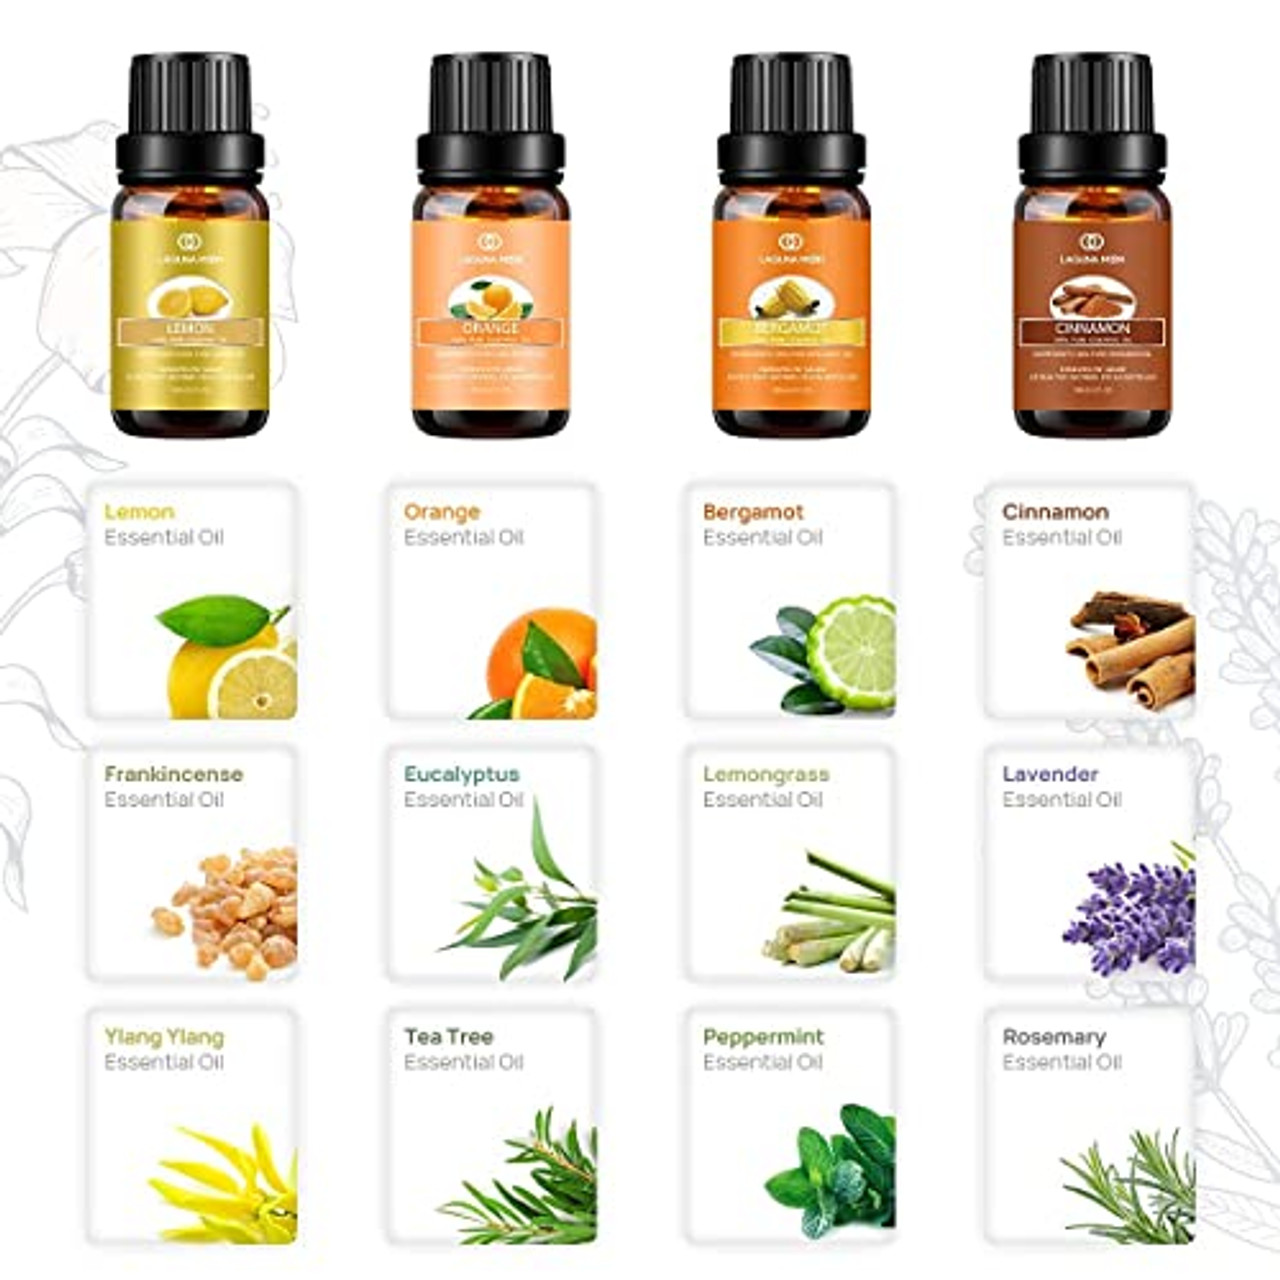 Lagunamoon Top 20 Gift Set - 10mL Multi-Scent Essential Oils for  Aromatherapy, Massage, Candle Making, Skin & Hair Care - Peppermint, Tea  Tree